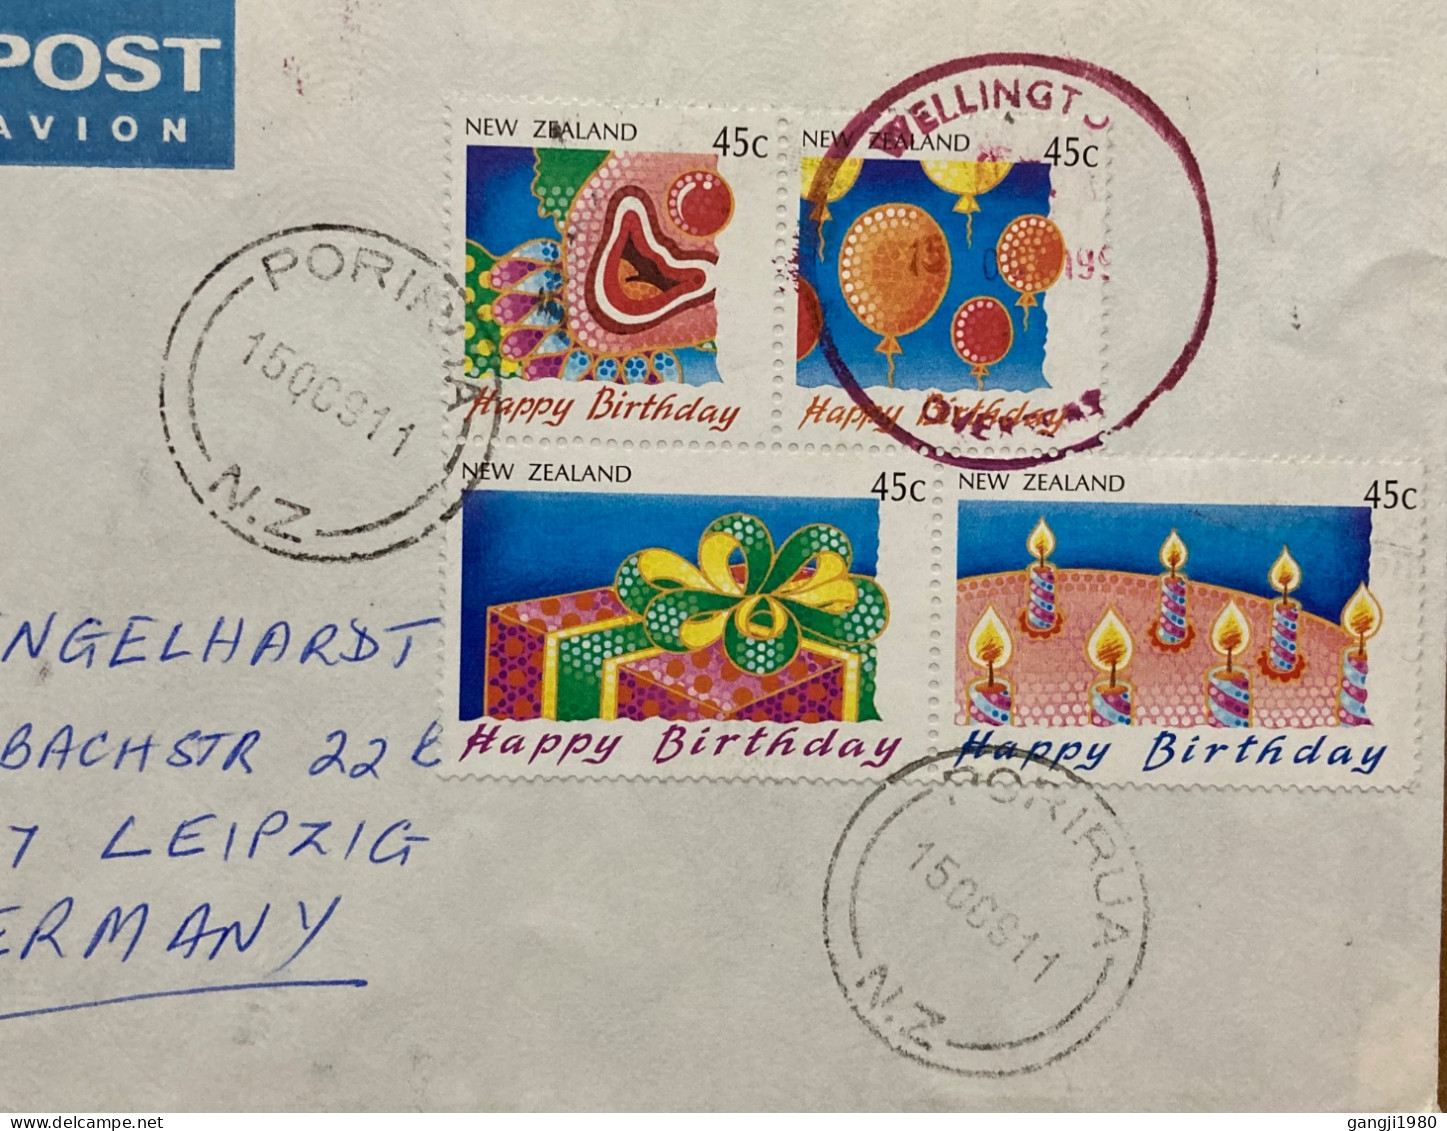 NEW ZEALAND 1991, COVER USED TO GERMANY, HAPPY BIRTHDAY 4 DIFF STAMP, PORIRUA CITY & WELLIGTON CITY CANCEL. - Covers & Documents